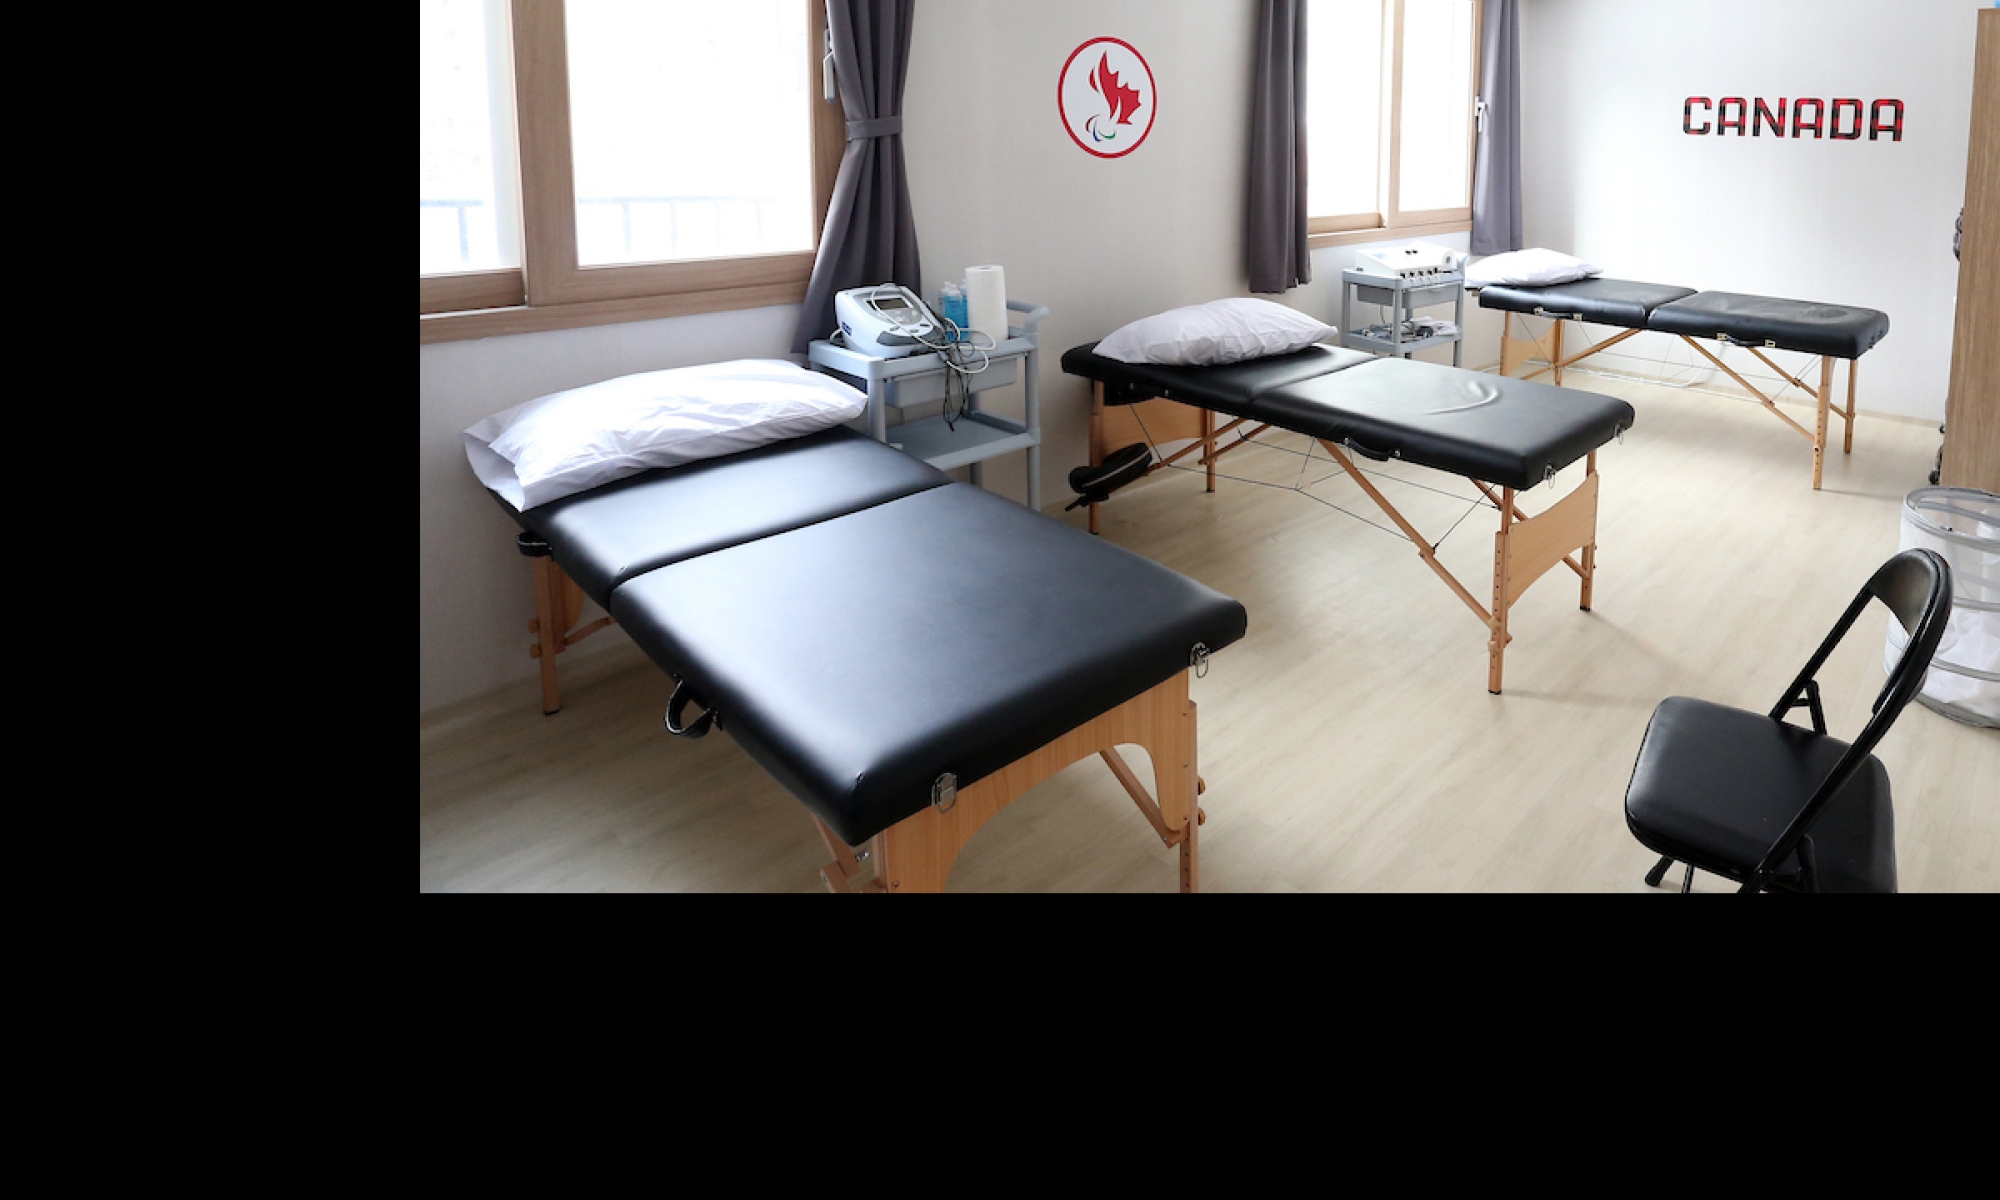 Physiotherapy centre in PeyongChang